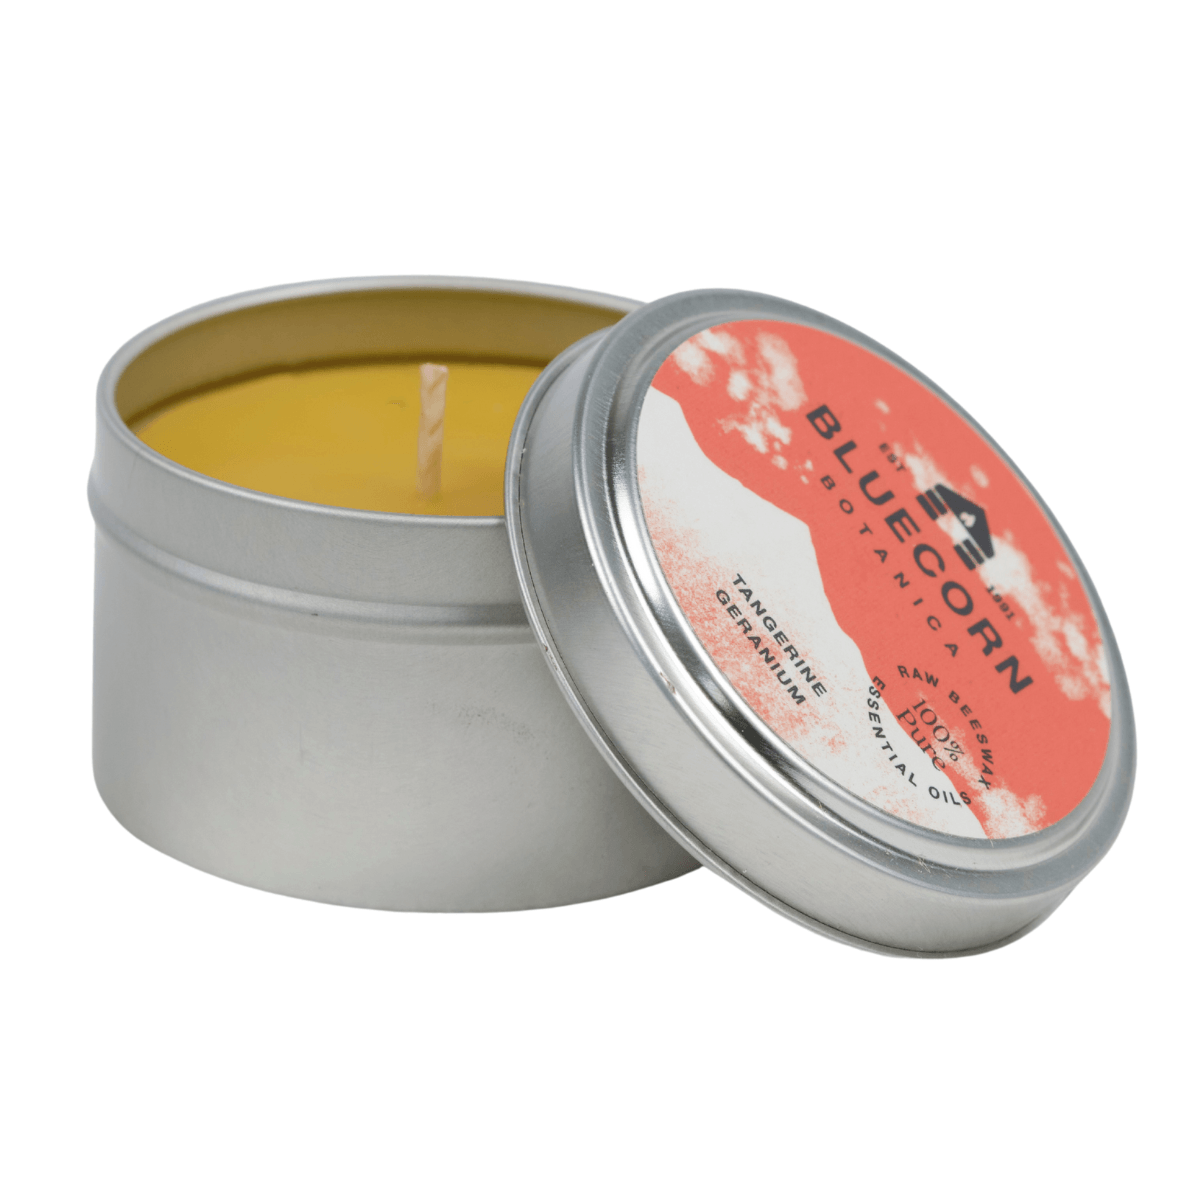 Bluecorn Botanica Tangerine and Geranium 100% Pure Beeswax Travel Tin Candle. Burn Time: 6oz Candle: 30 Hours. 2oz Candle 12 Hours. Made with 100% Pure Beeswax and 100% Pure Essential Oils. Made with 100% pure cotton wick, no lead and paraffin free. Clean burning and non-toxic. Features Bluecorn Botanica Label in recyclable aluminum tin. Perfect for travel, camping and gifts. 